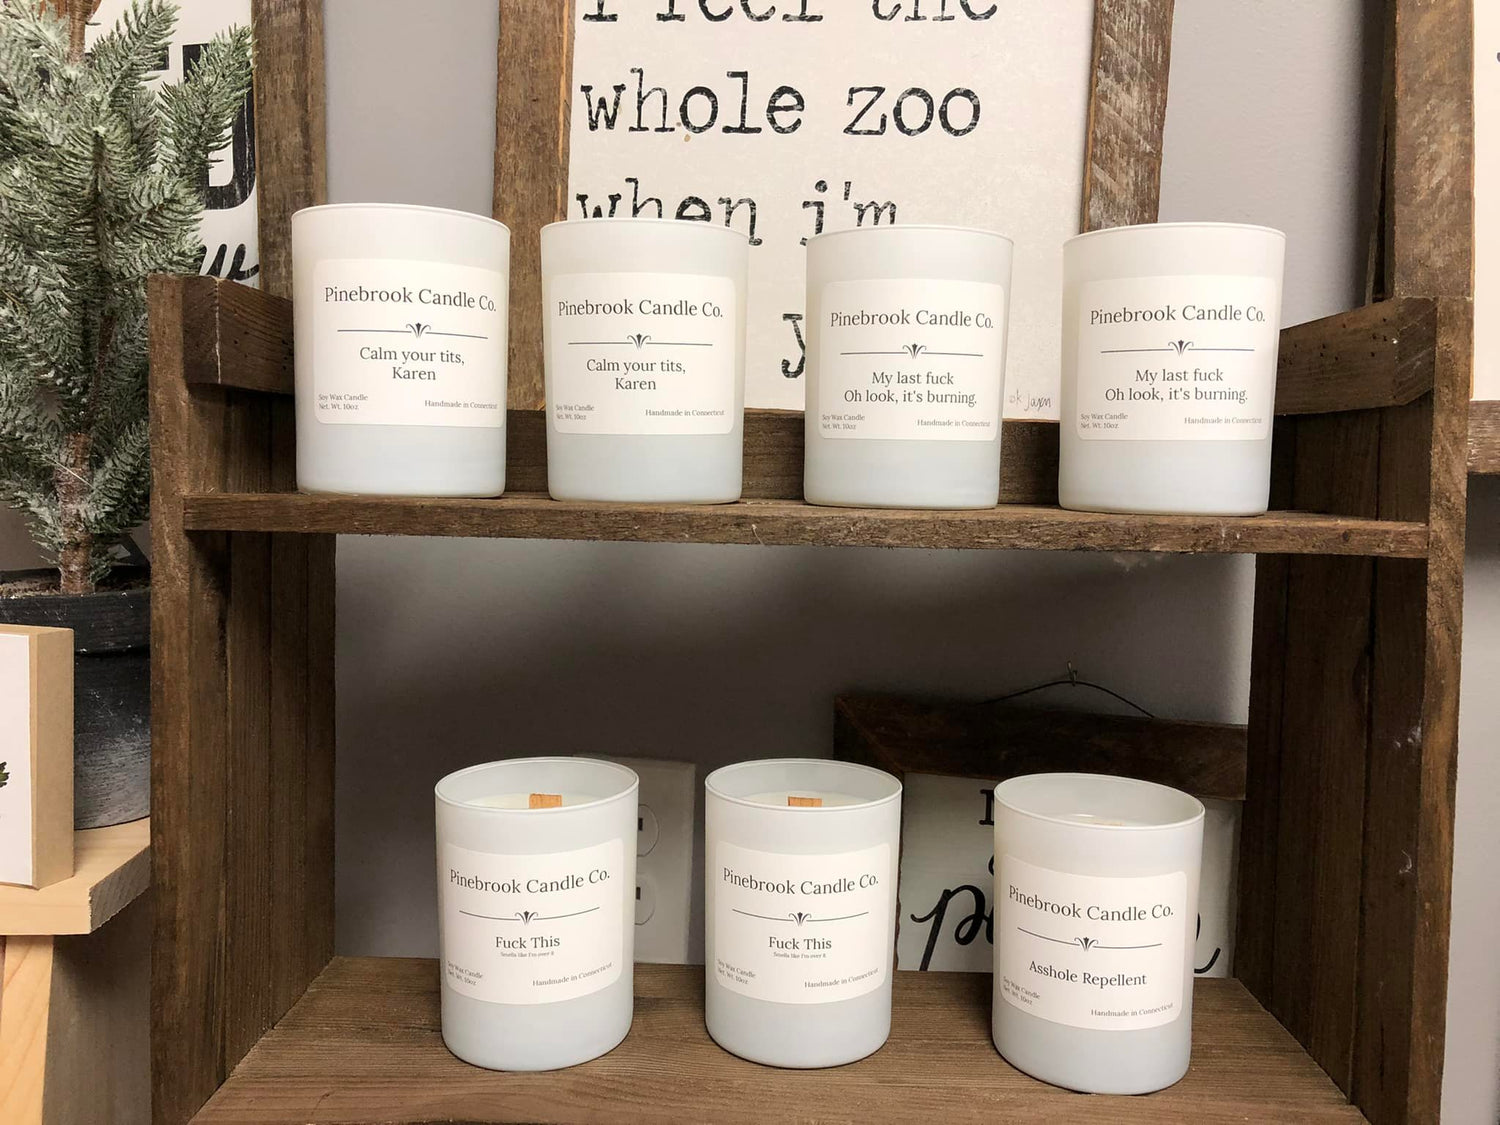 Pinebrook Candle Co. - Local Vendor - Handmade with care and even humor!